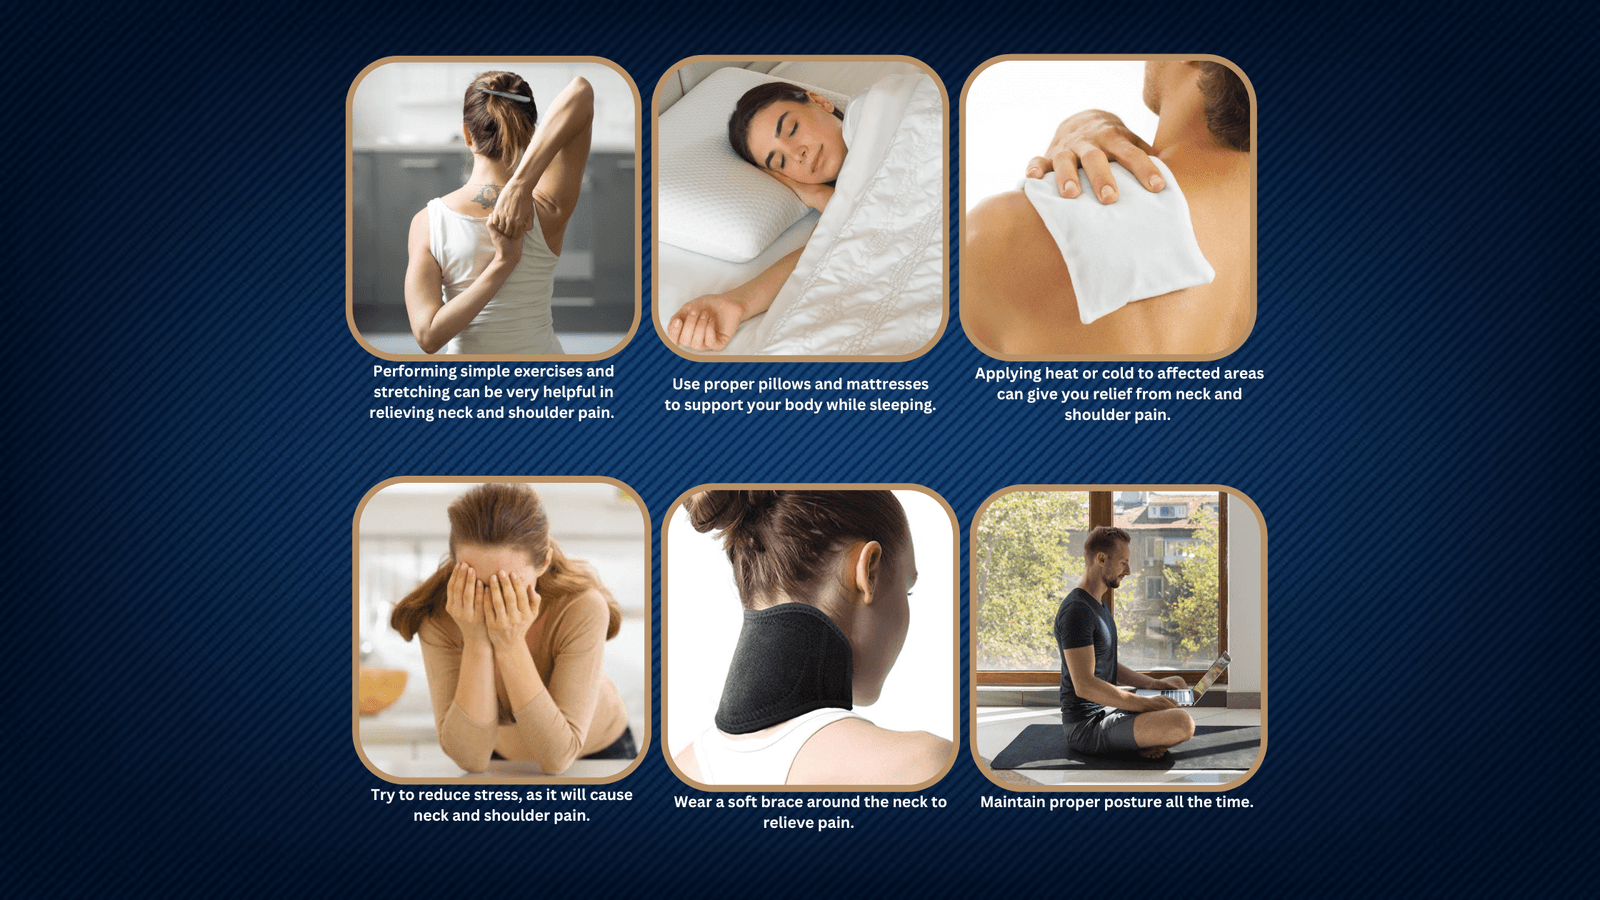 Tips To Reduce Neck And Shoulder Pain